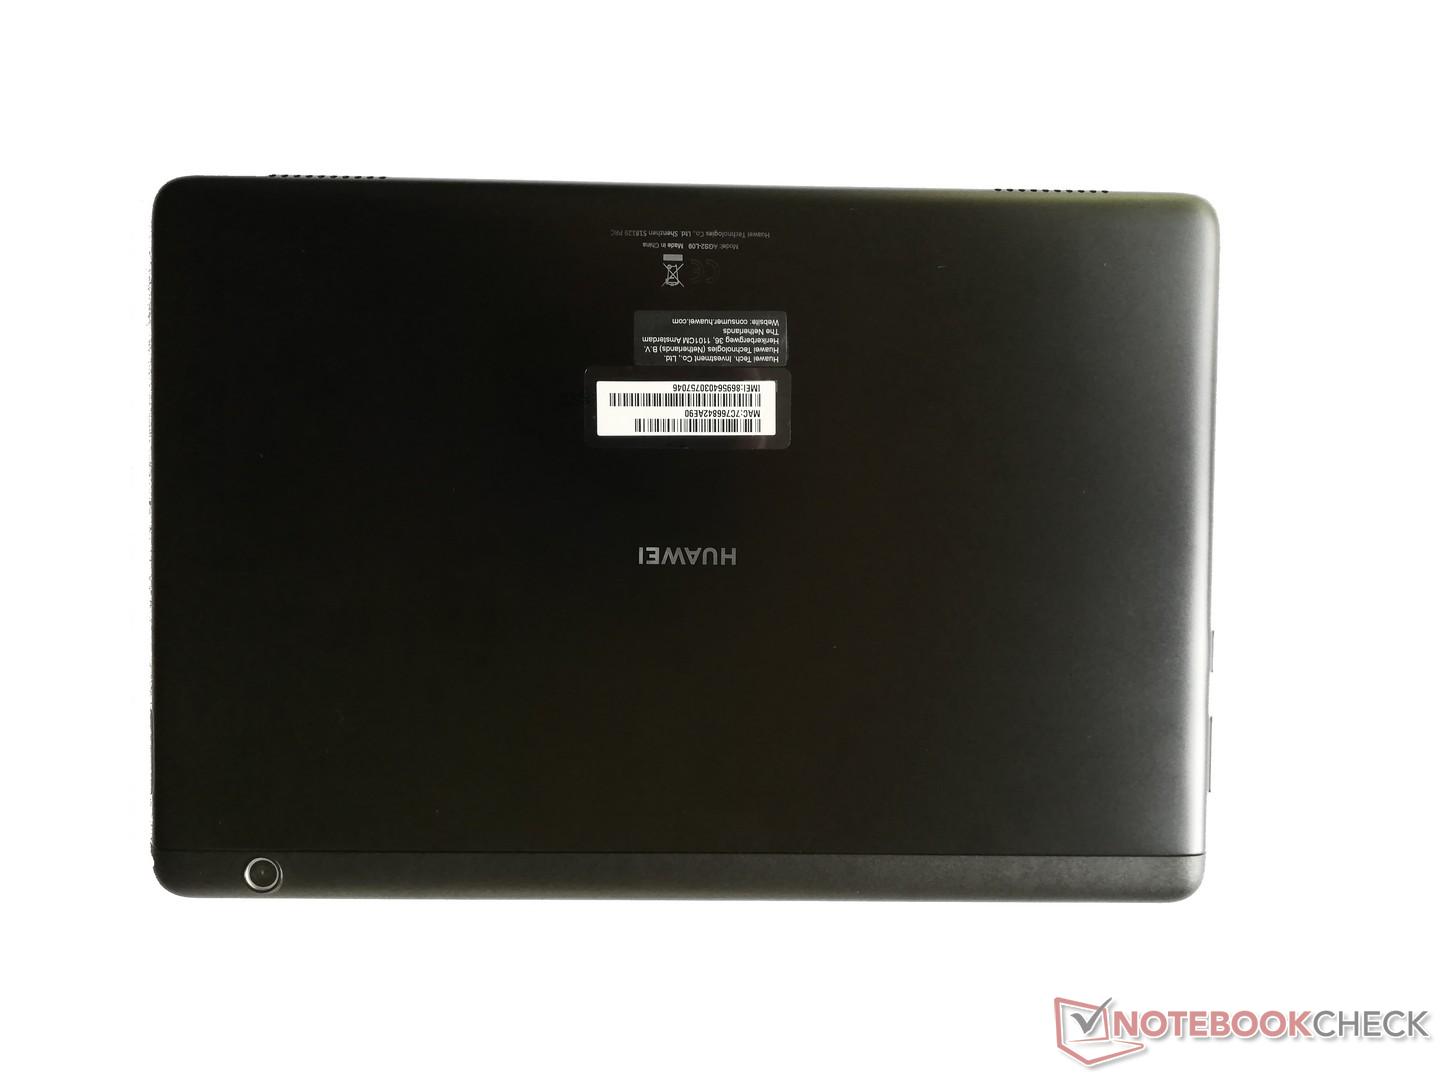 Huawei mediapad t5 10 inch tablet review